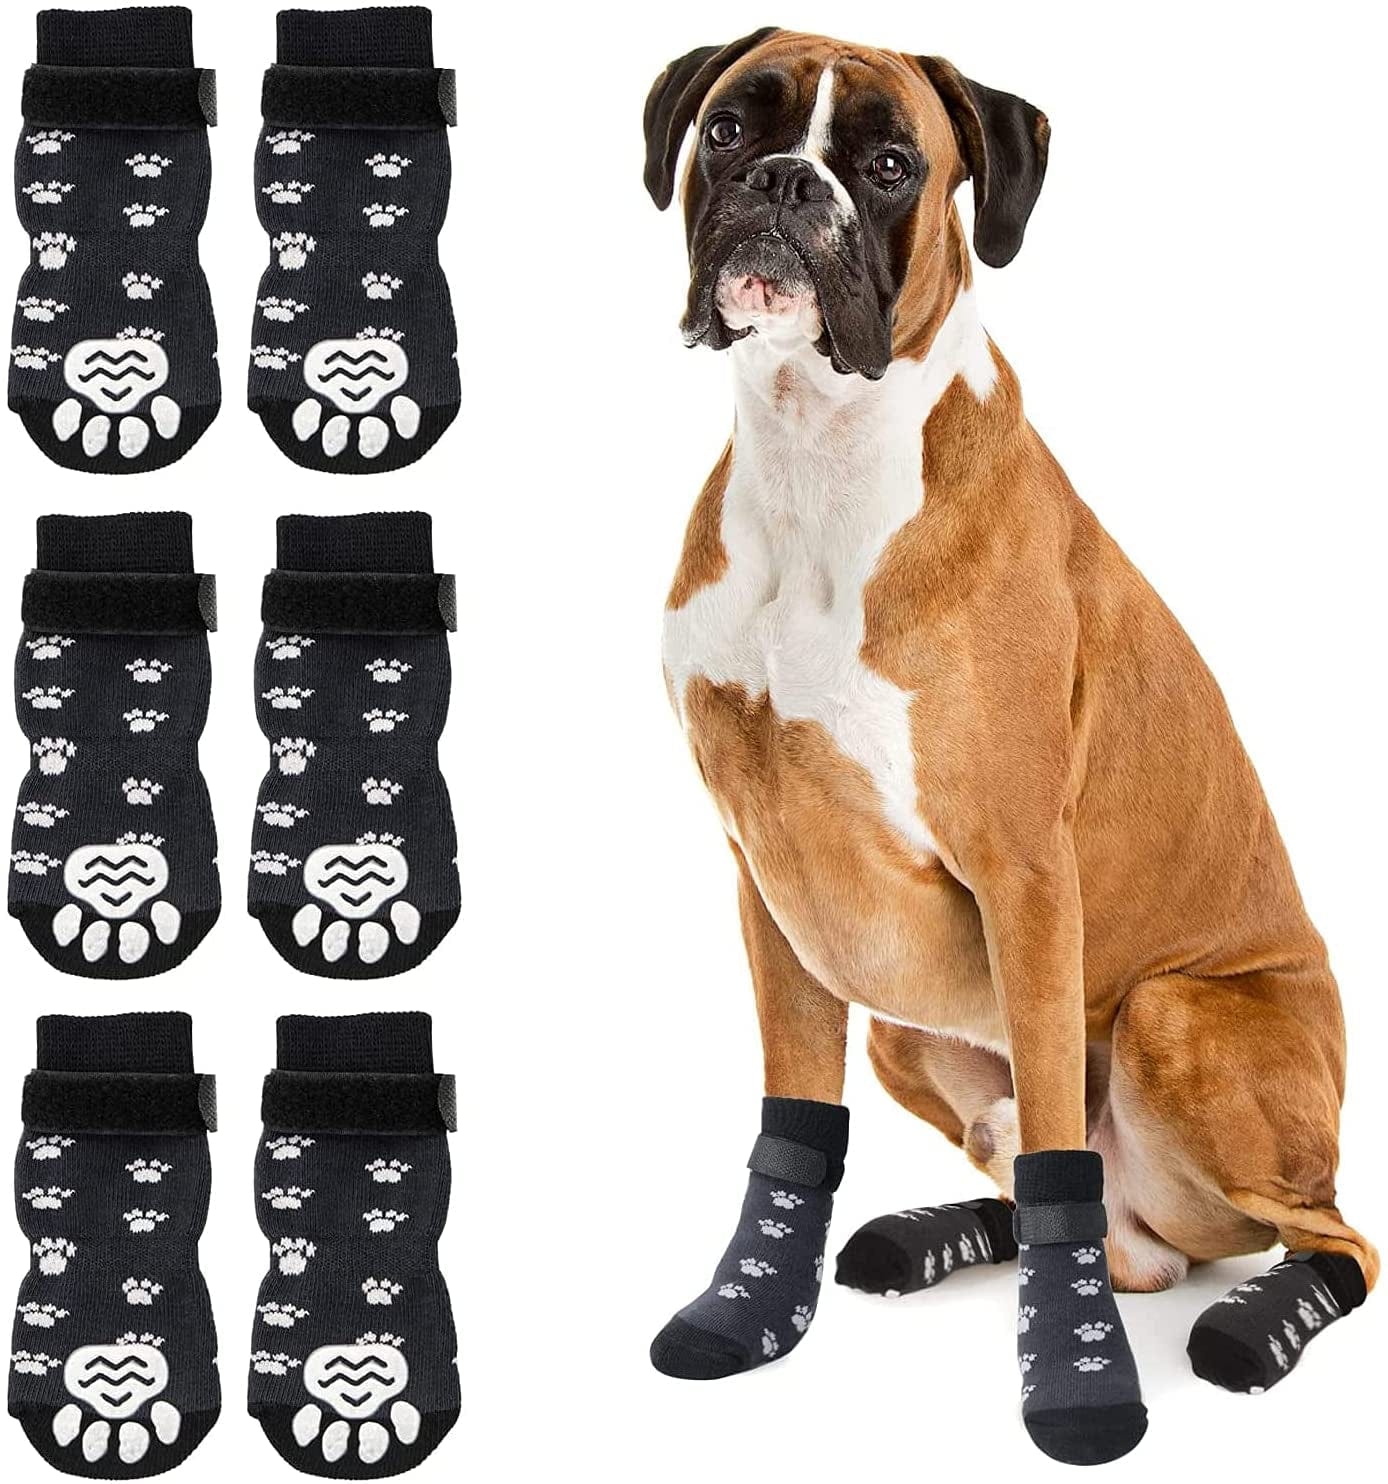 https://kol.pet/cdn/shop/products/rypet-anti-slip-dog-socks-3-pairs-dog-grip-socks-with-straps-traction-control-for-indoor-on-hardwood-floor-wear-pet-paw-protector-for-small-medium-large-dogs-l-40521667608849_1388x.jpg?v=1675852383